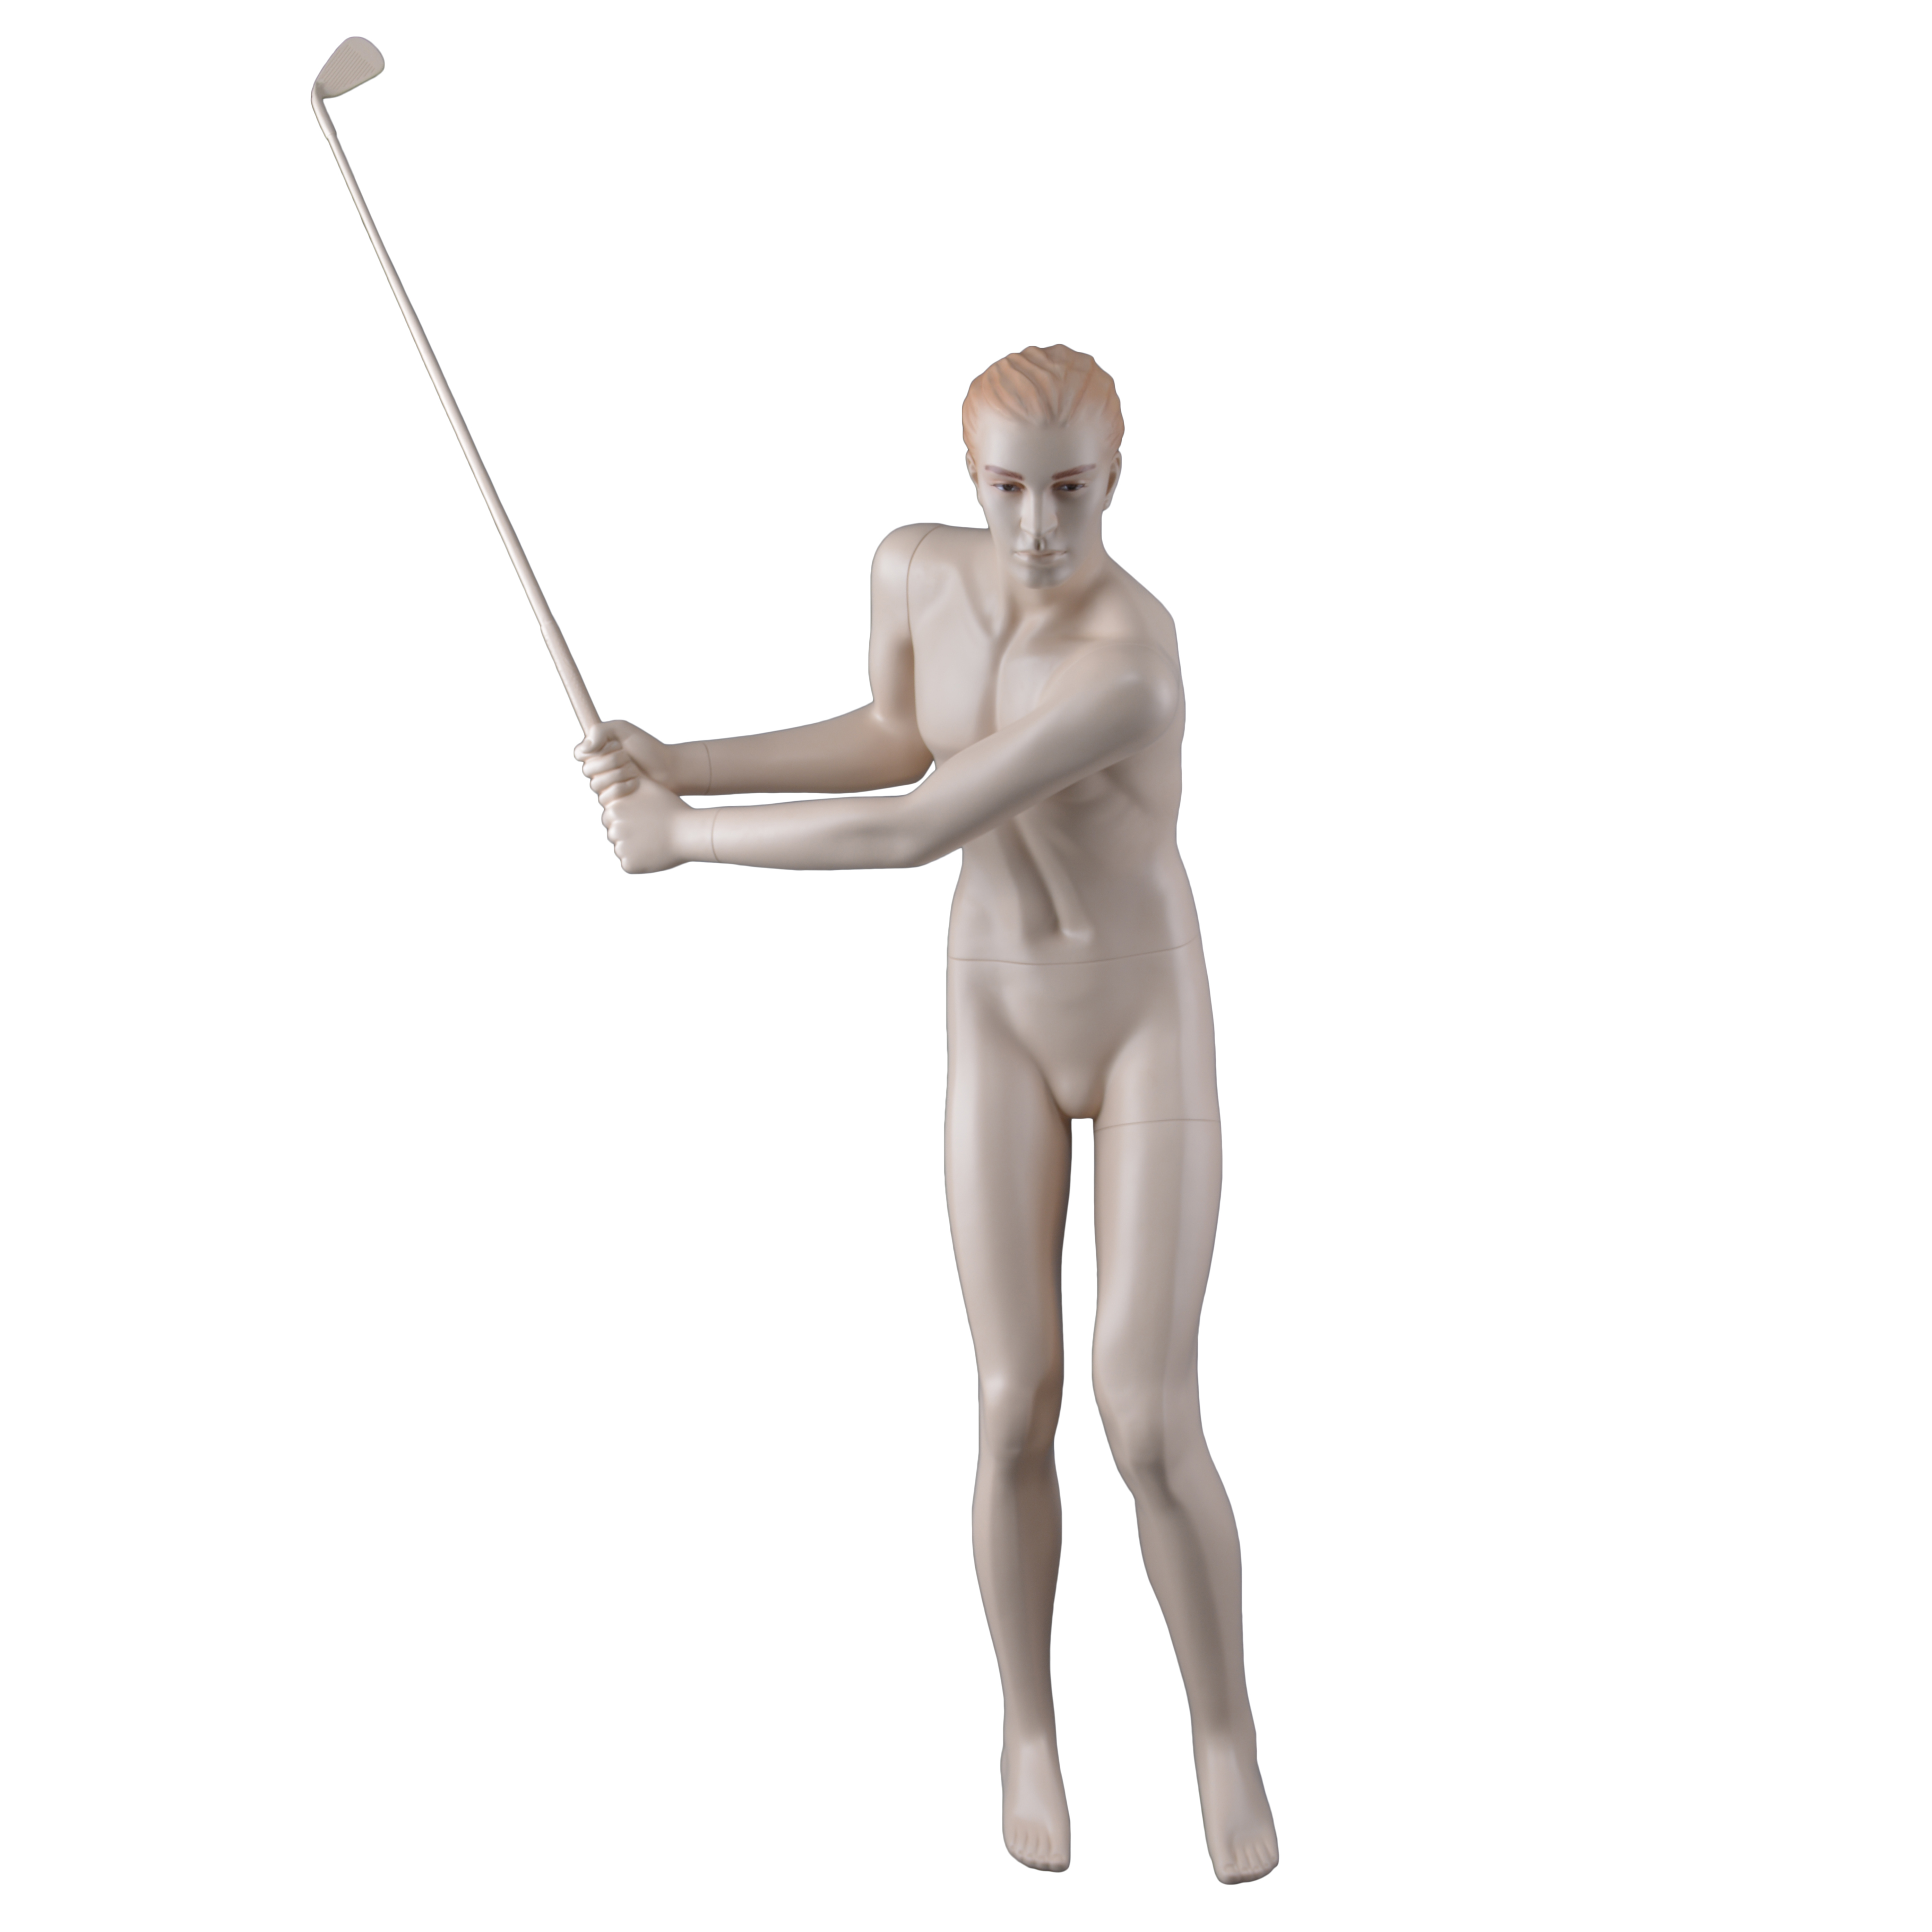 Shop store display life size display goal female manikin male sport mannequin(DPM)